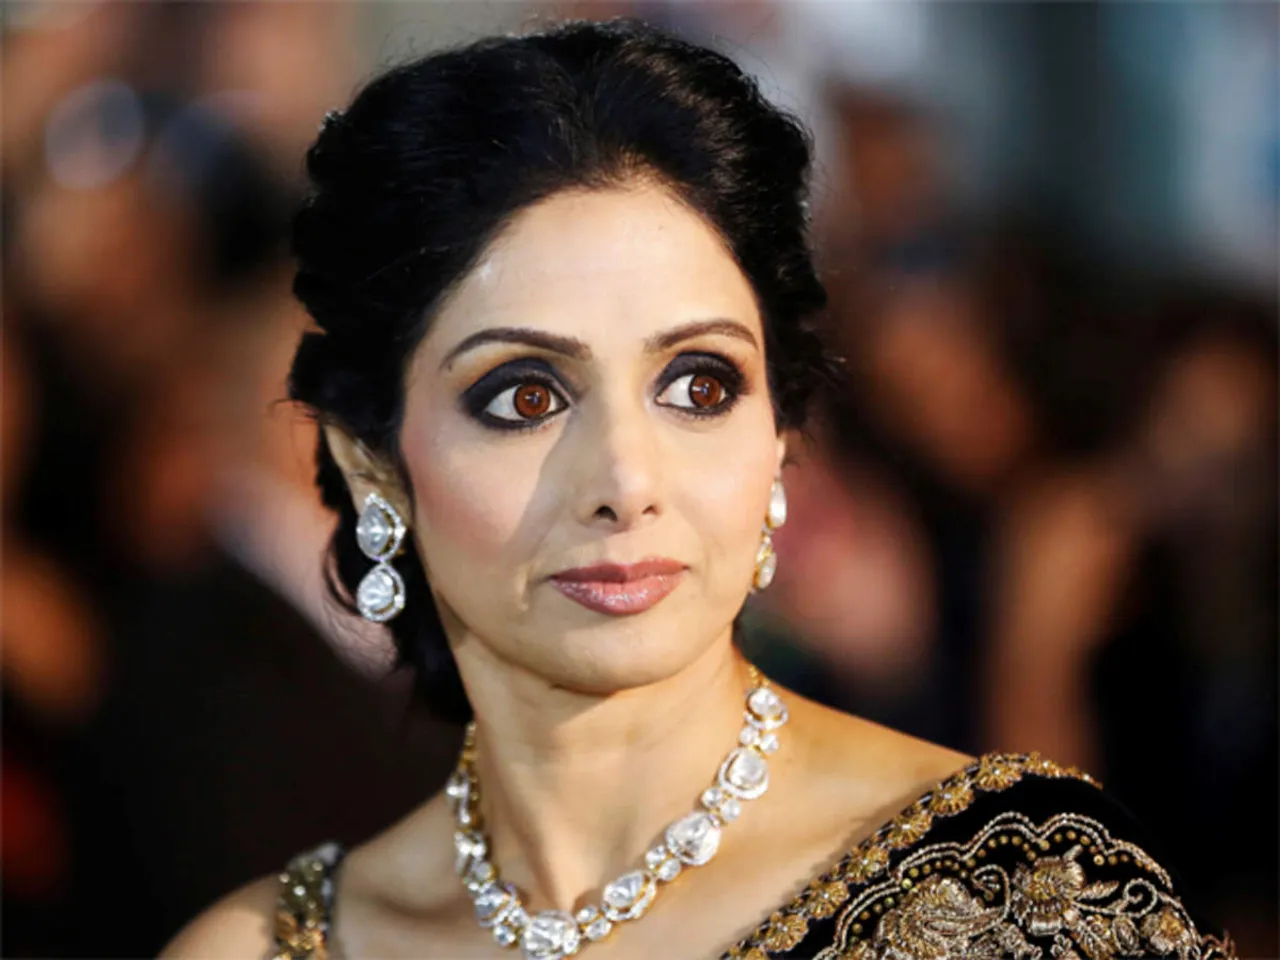 Family and friends celebrate Sridevi's legacy on 60th birth anniversary